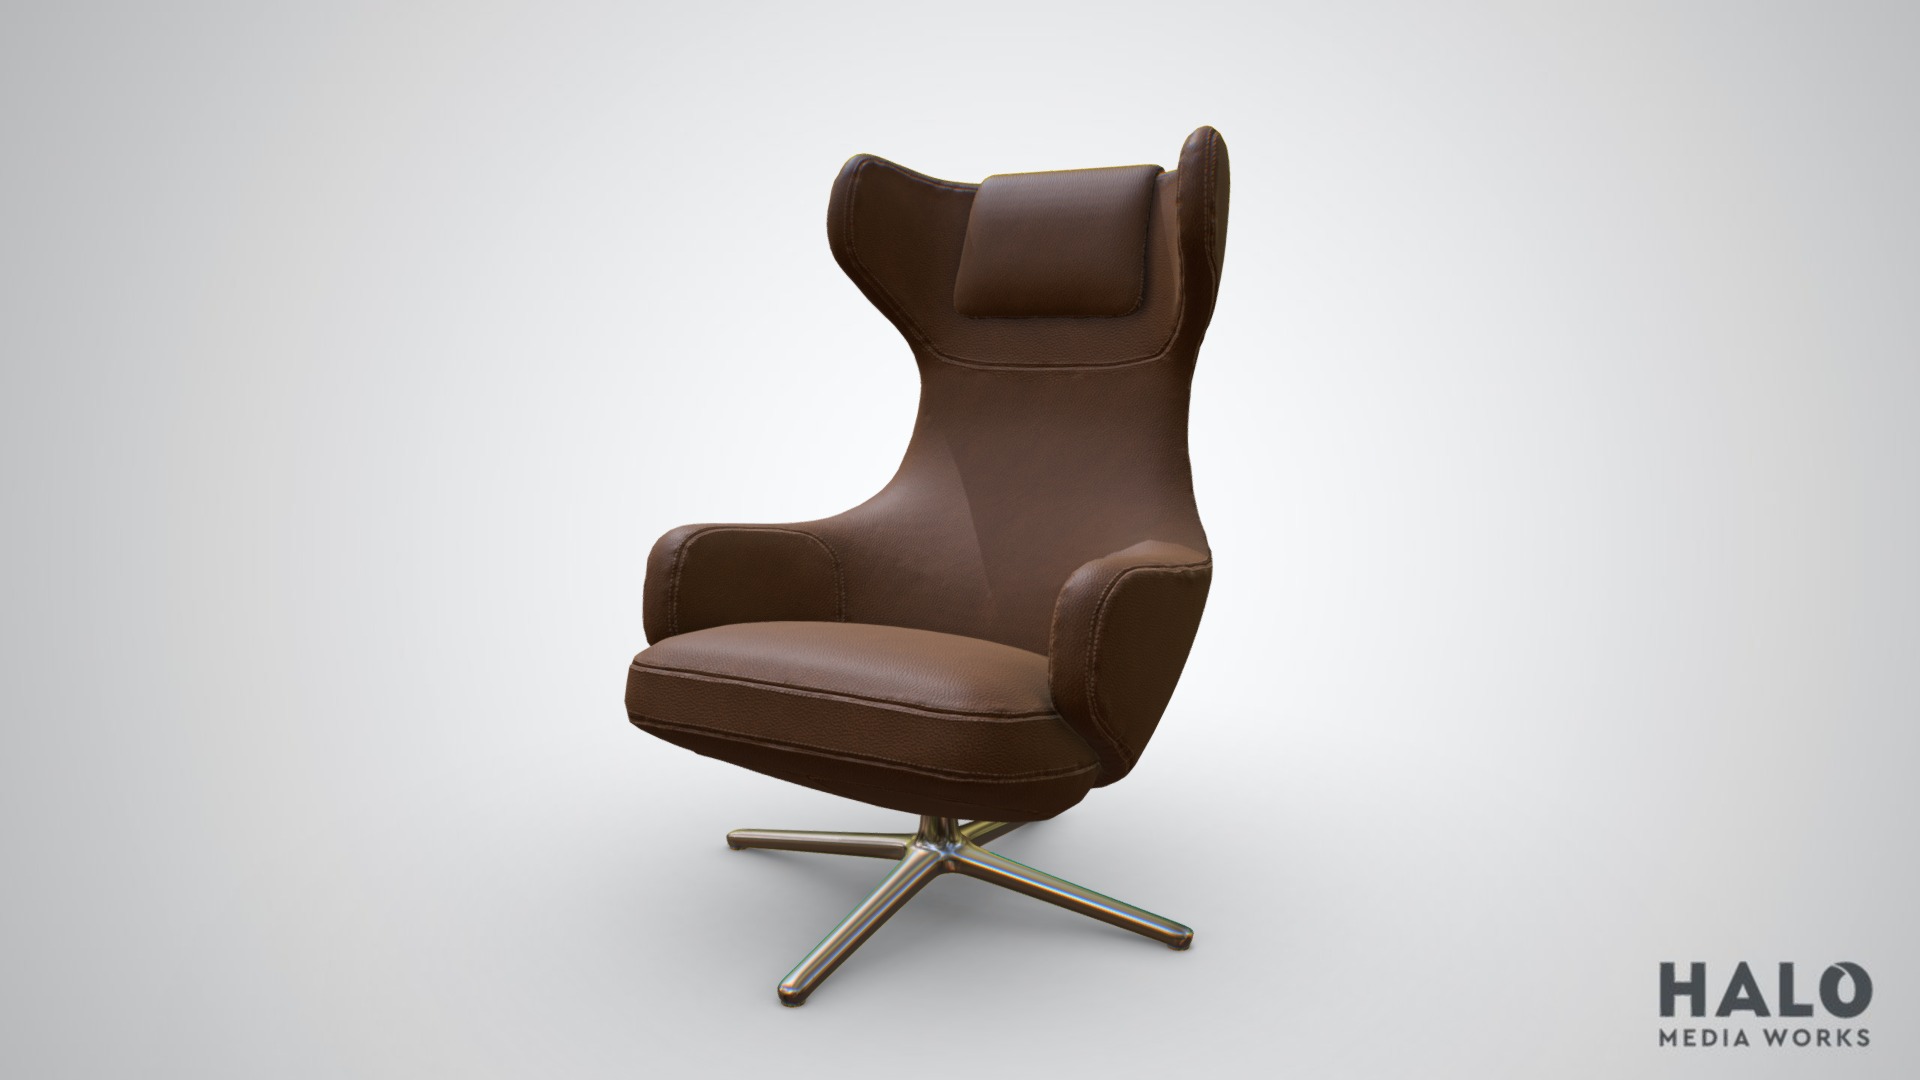 3D model Grand Repos Lounge Chair - This is a 3D model of the Grand Repos Lounge Chair. The 3D model is about a brown leather chair.